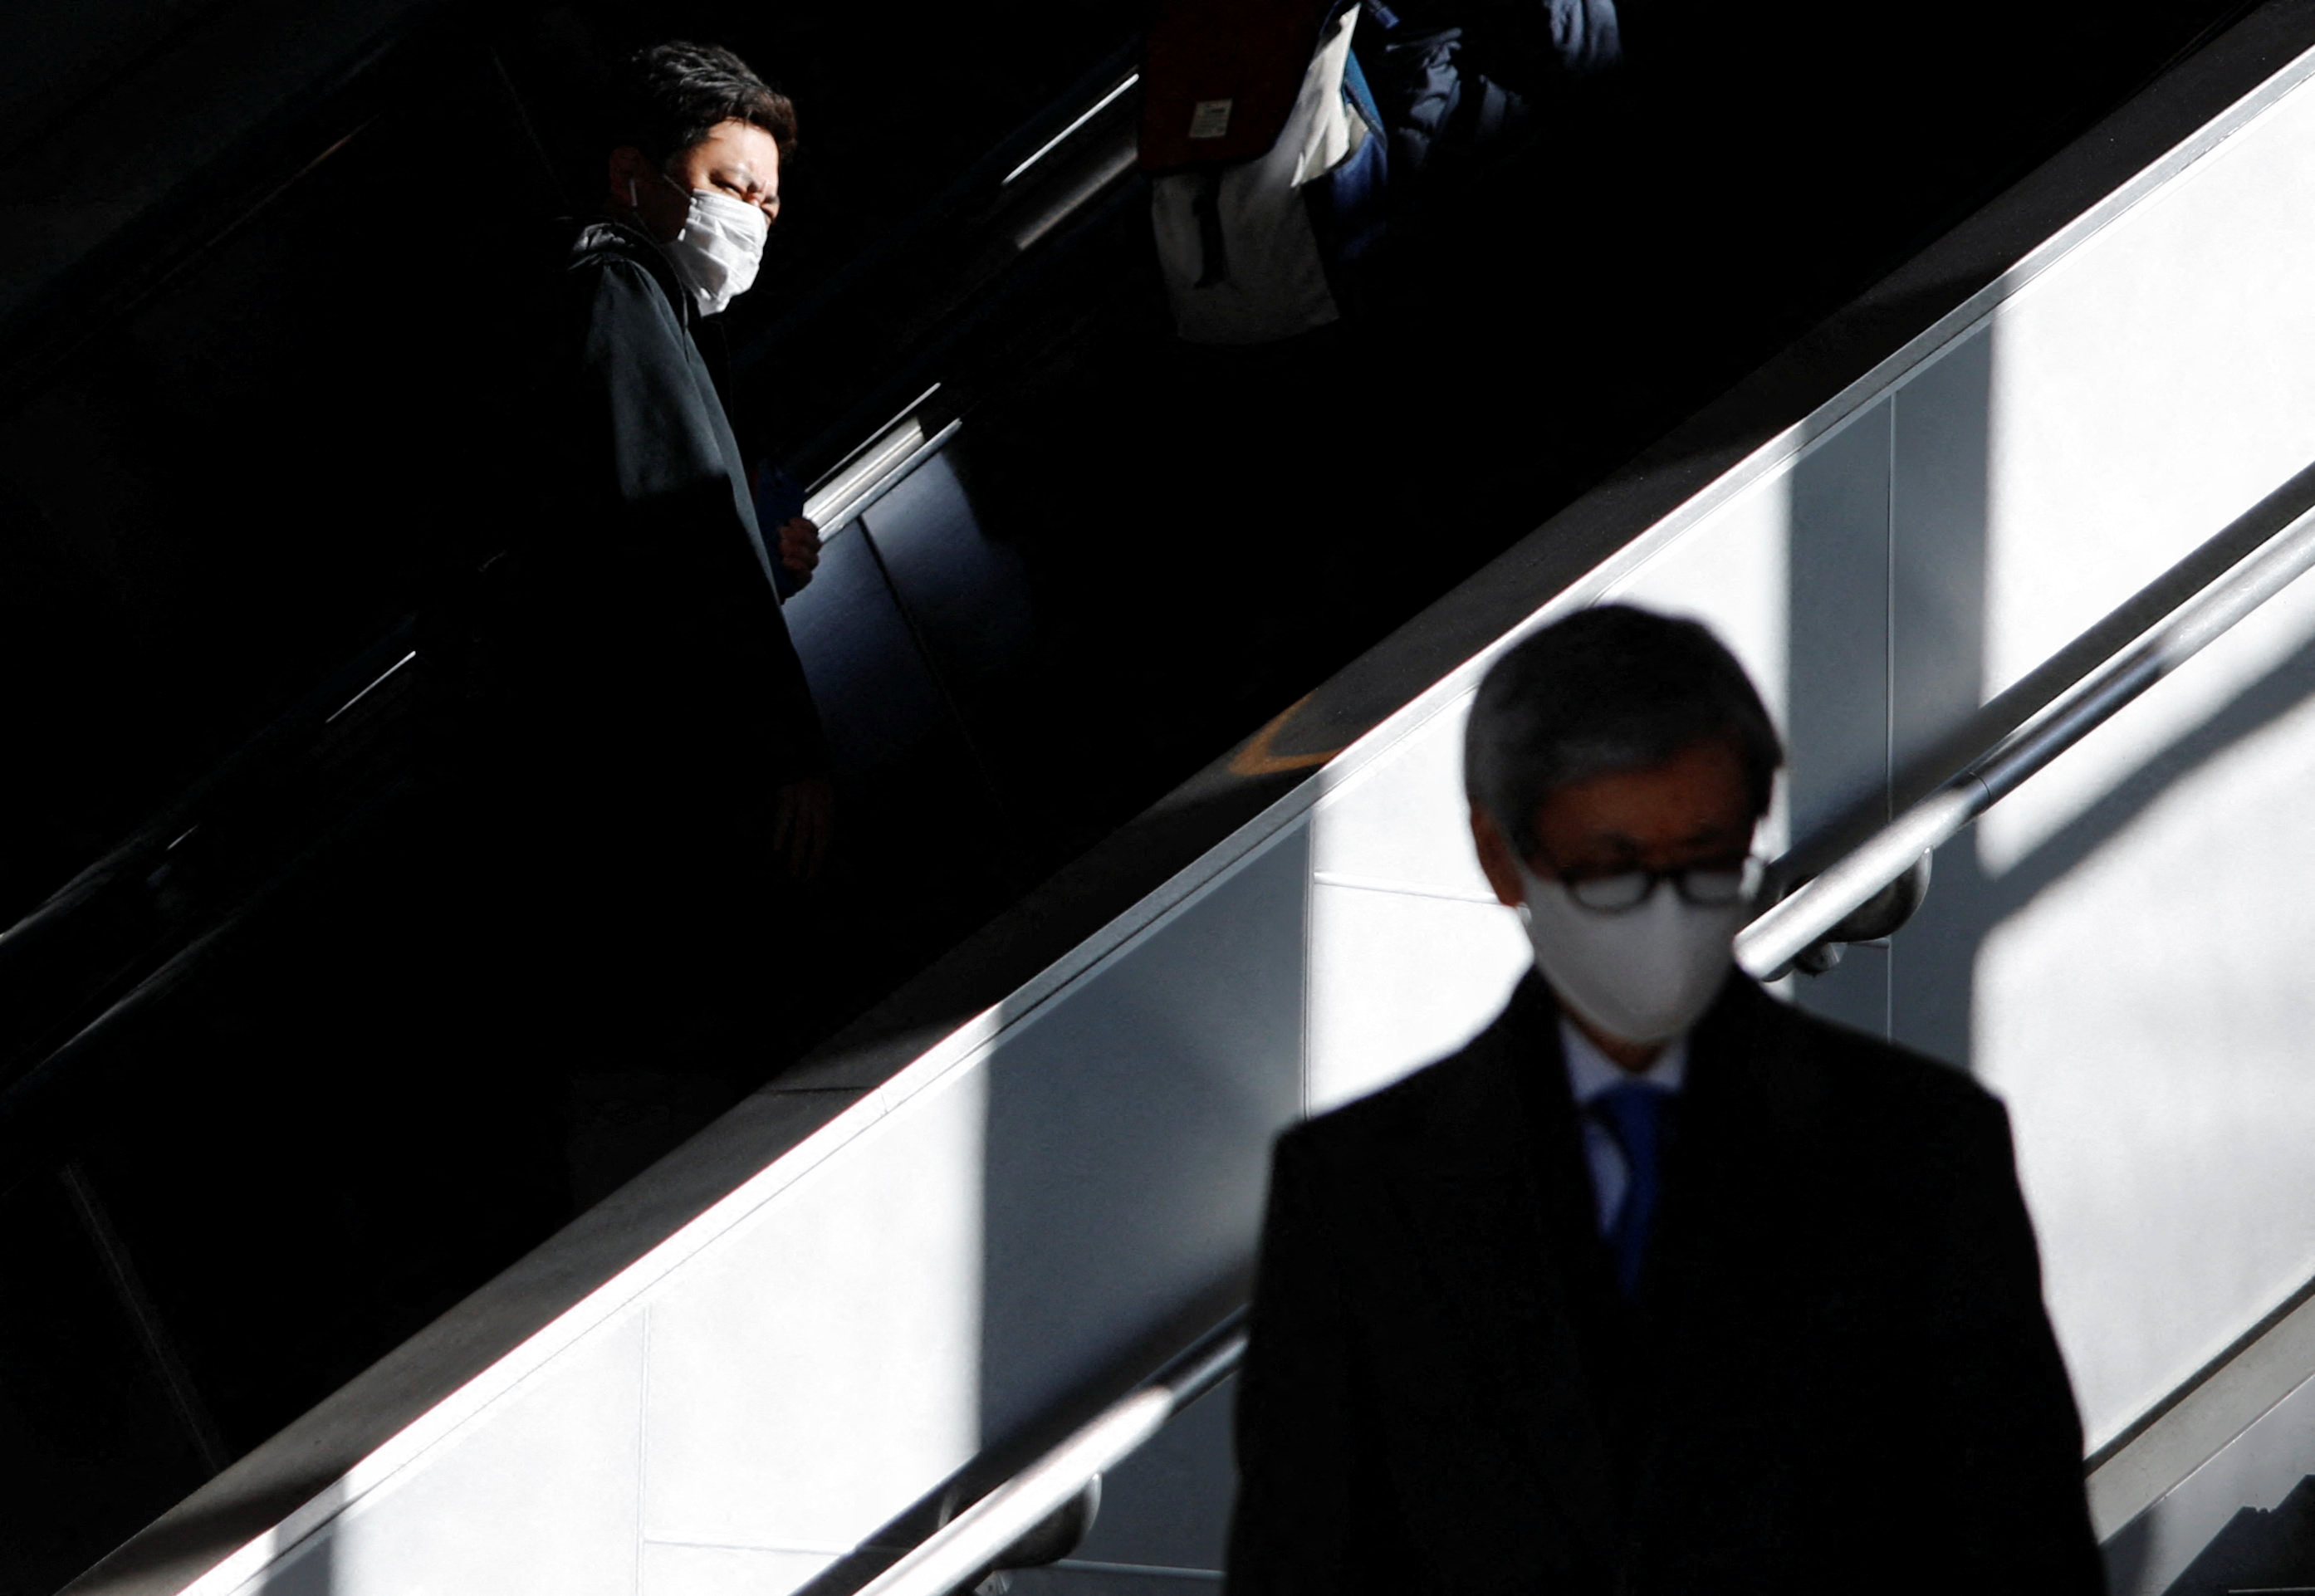 Passengers wearing protective face masks are pictured at a train station, amid the coronavirus disease (COVID-19) pandemic, in Tokyo, Japan, January 7, 2022. REUTERS/Issei Kato